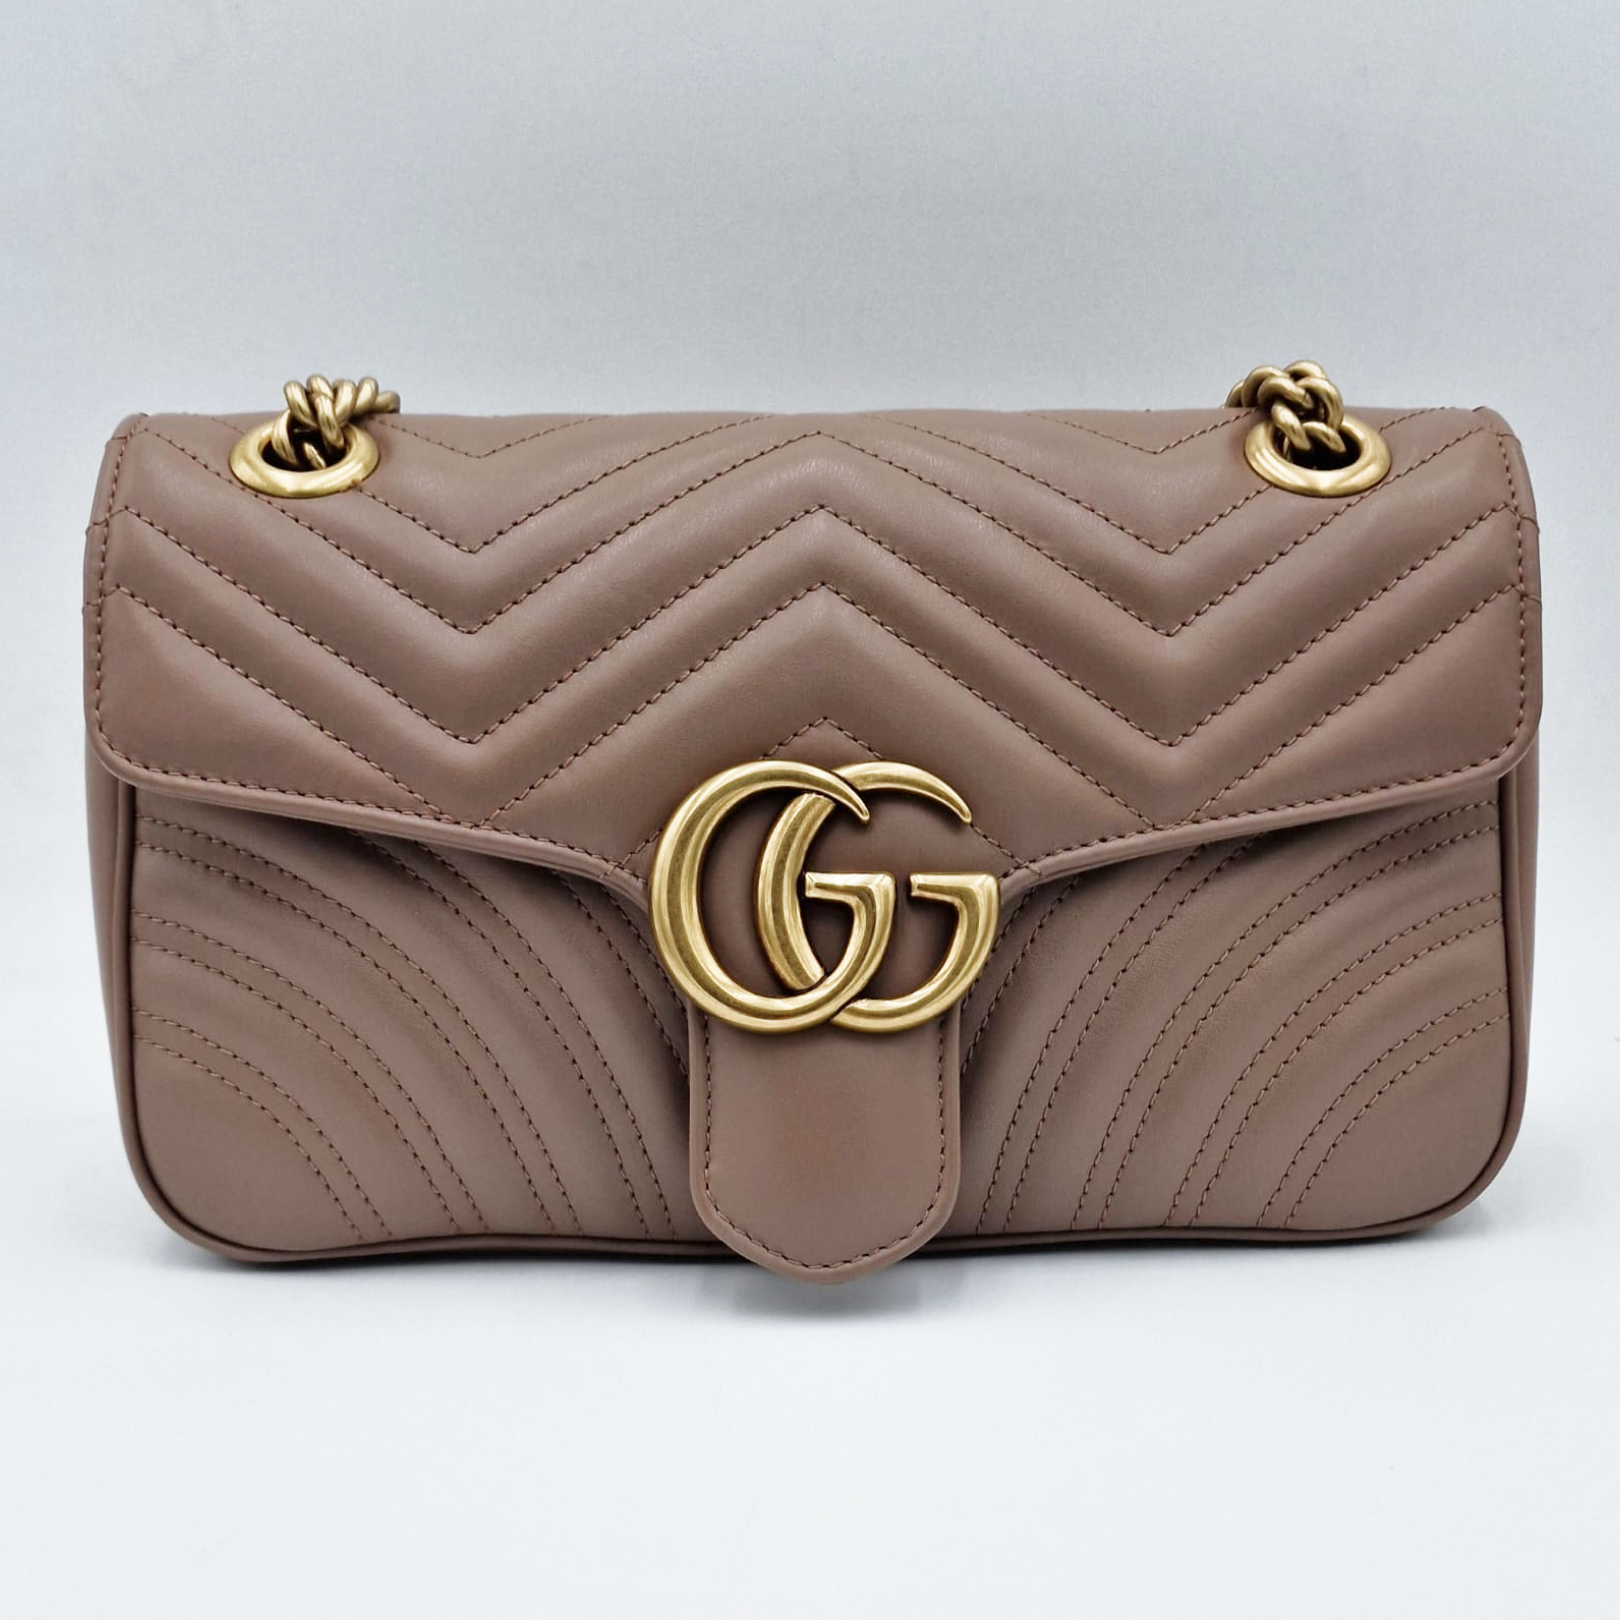 Gucci Marmont Dusty Pink